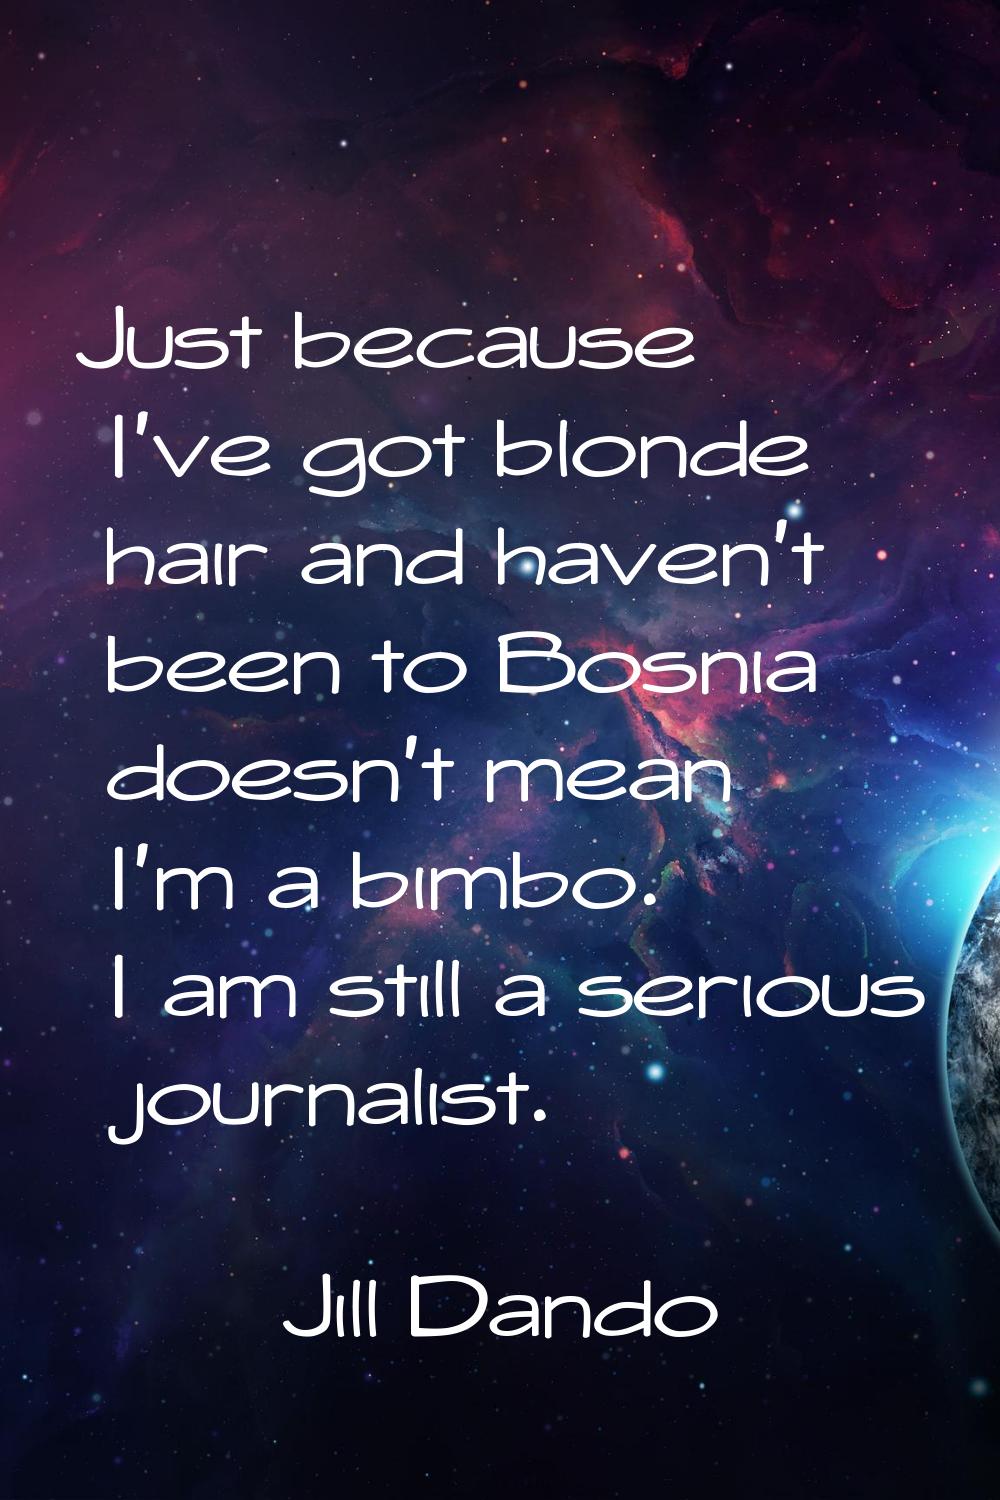 Just because I've got blonde hair and haven't been to Bosnia doesn't mean I'm a bimbo. I am still a